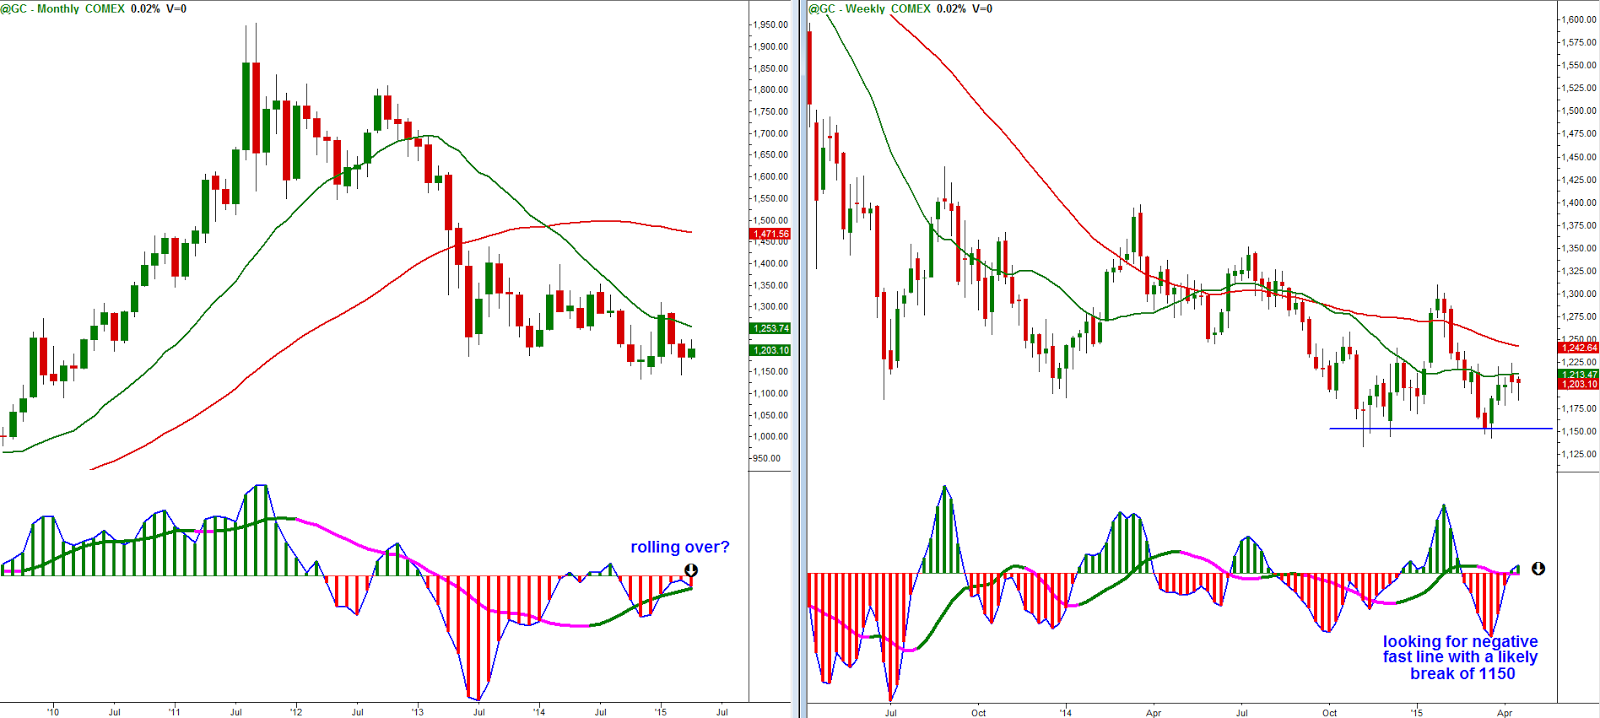 Gold Monthly and Weekly